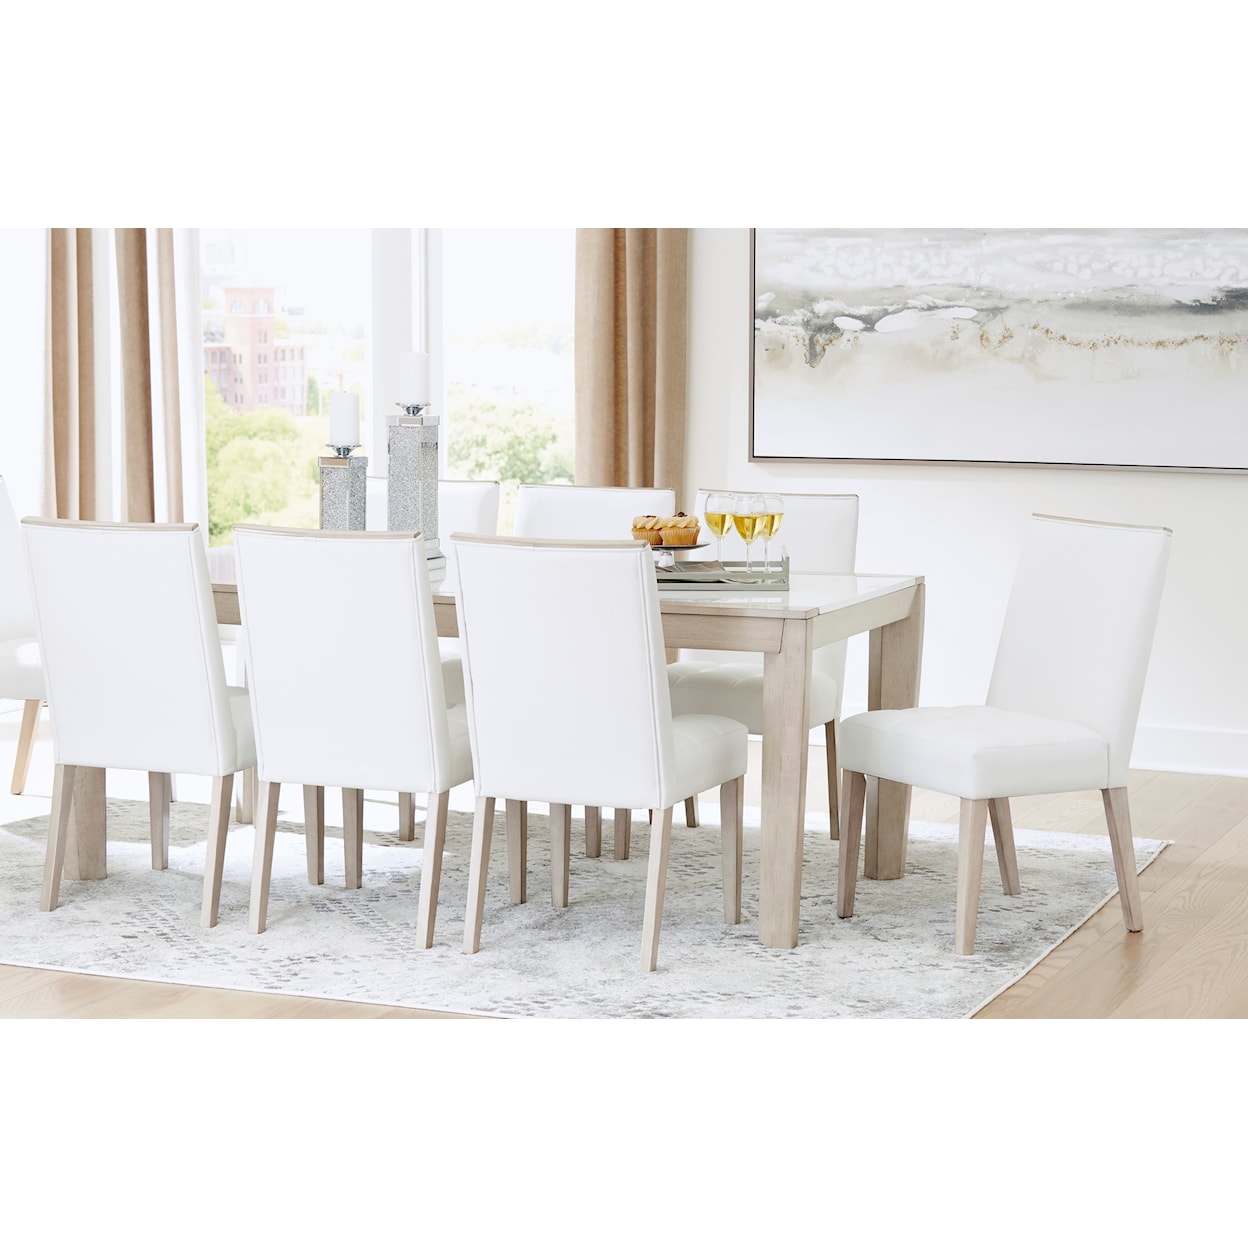 Signature Design by Ashley Wendora Table and 8 Chair Dining Set